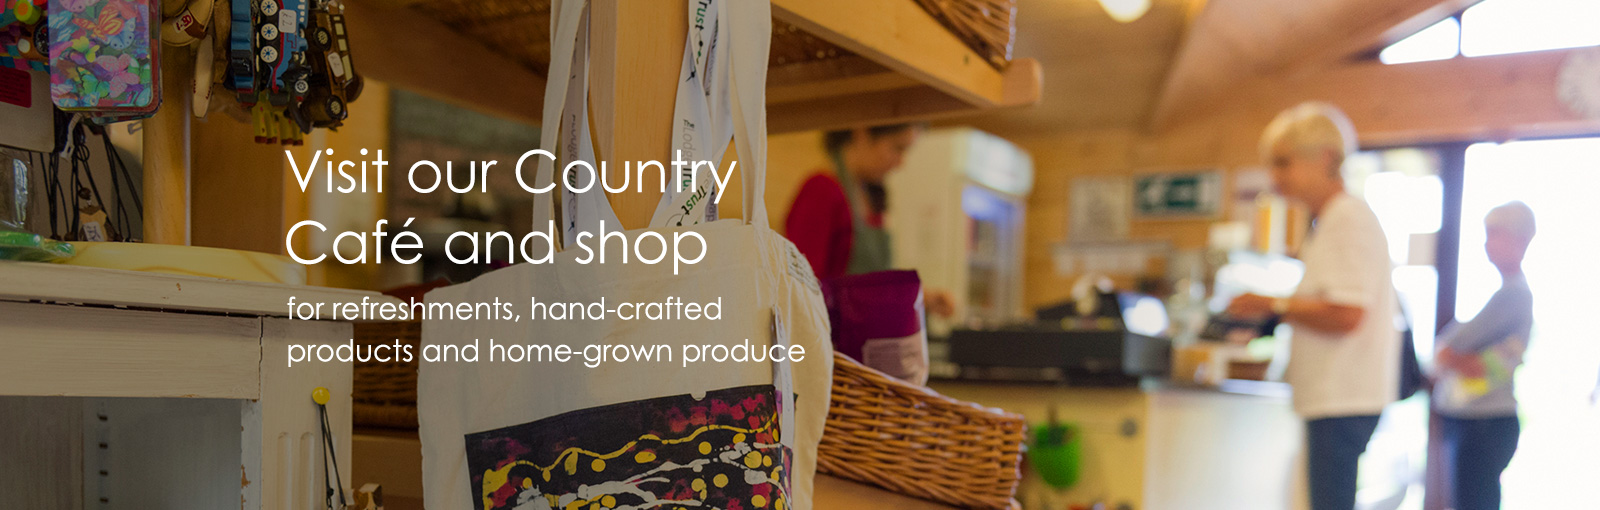 Visit our Country Café and Shop for refreshments, hand-crafted products and home-grown produce